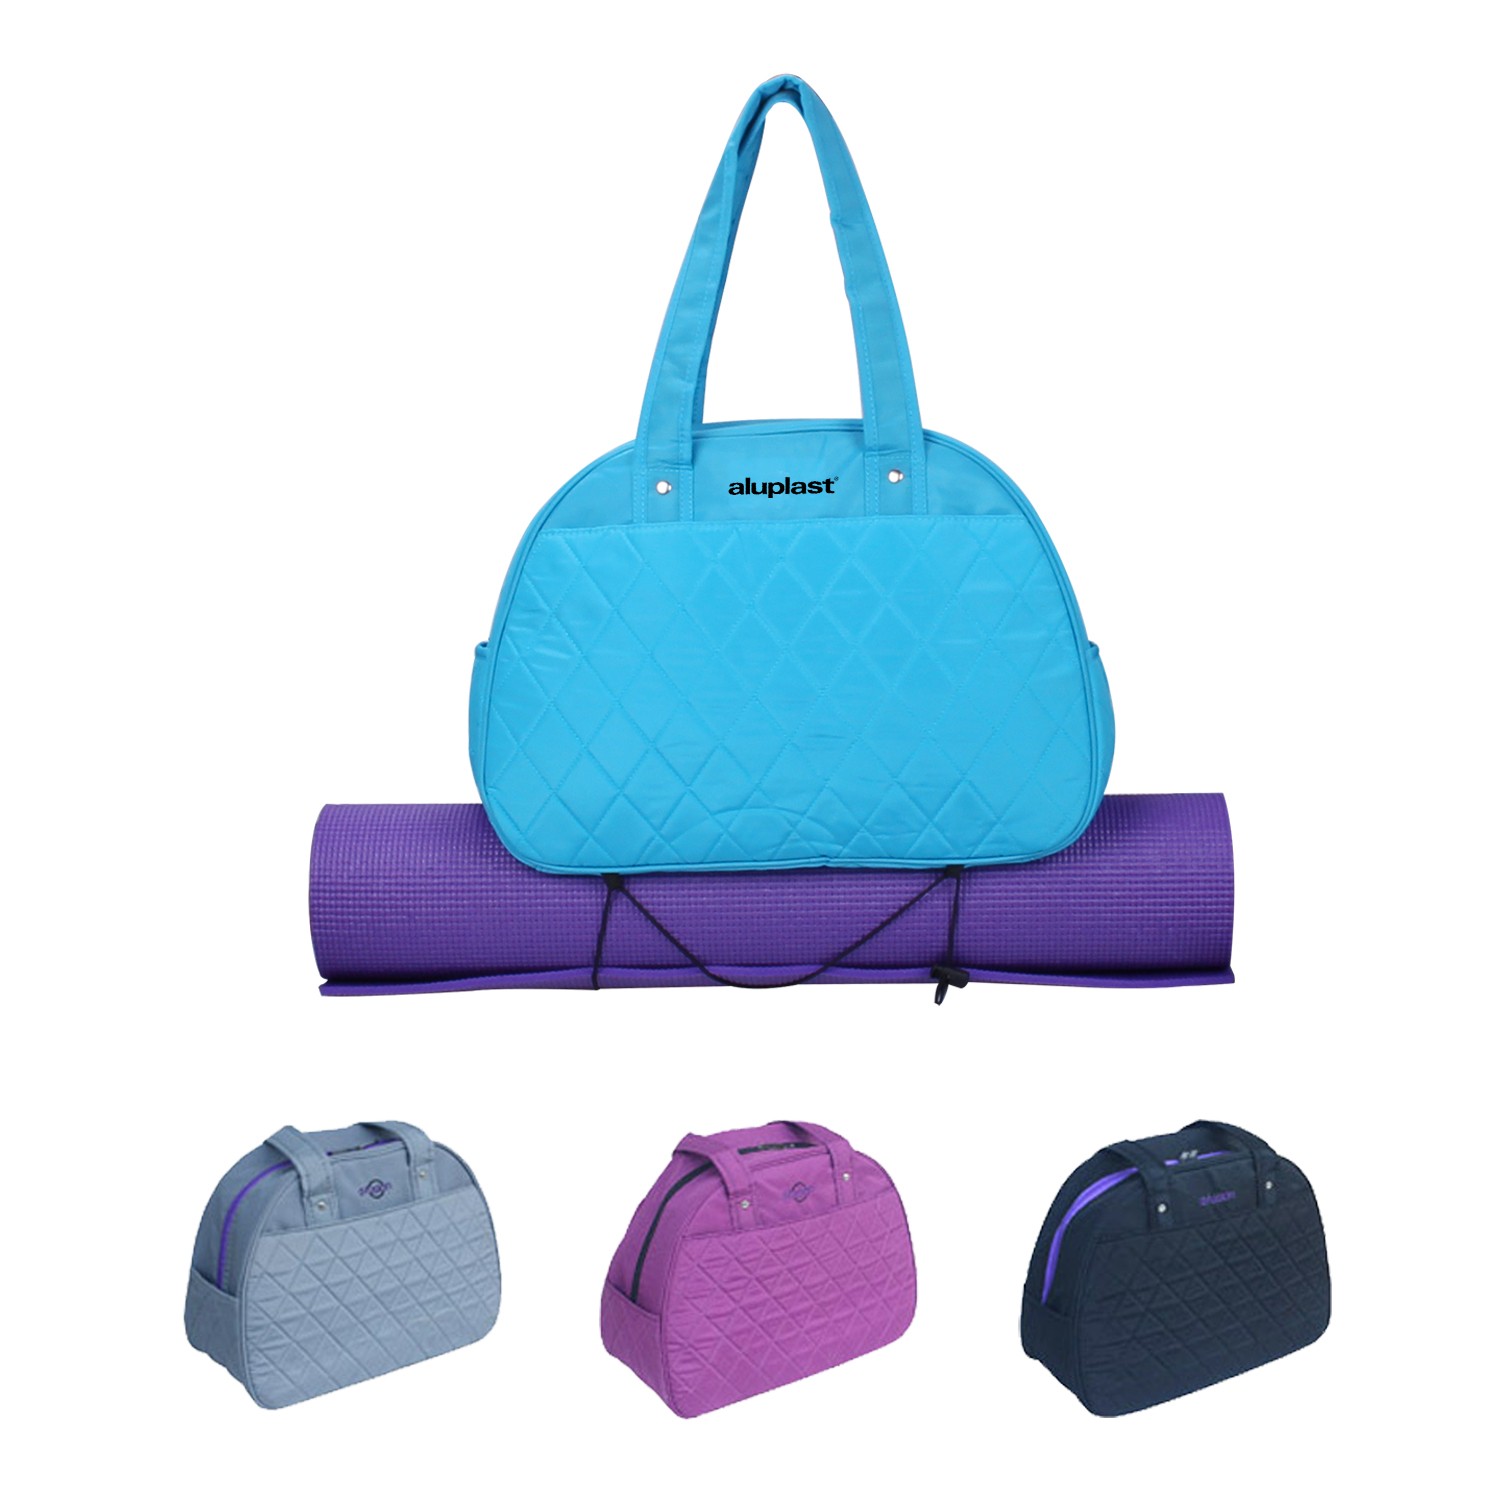 Waterproof Yoga Bag with Multiple Compartments - Waterproof Yoga Bag with Multiple Compartments